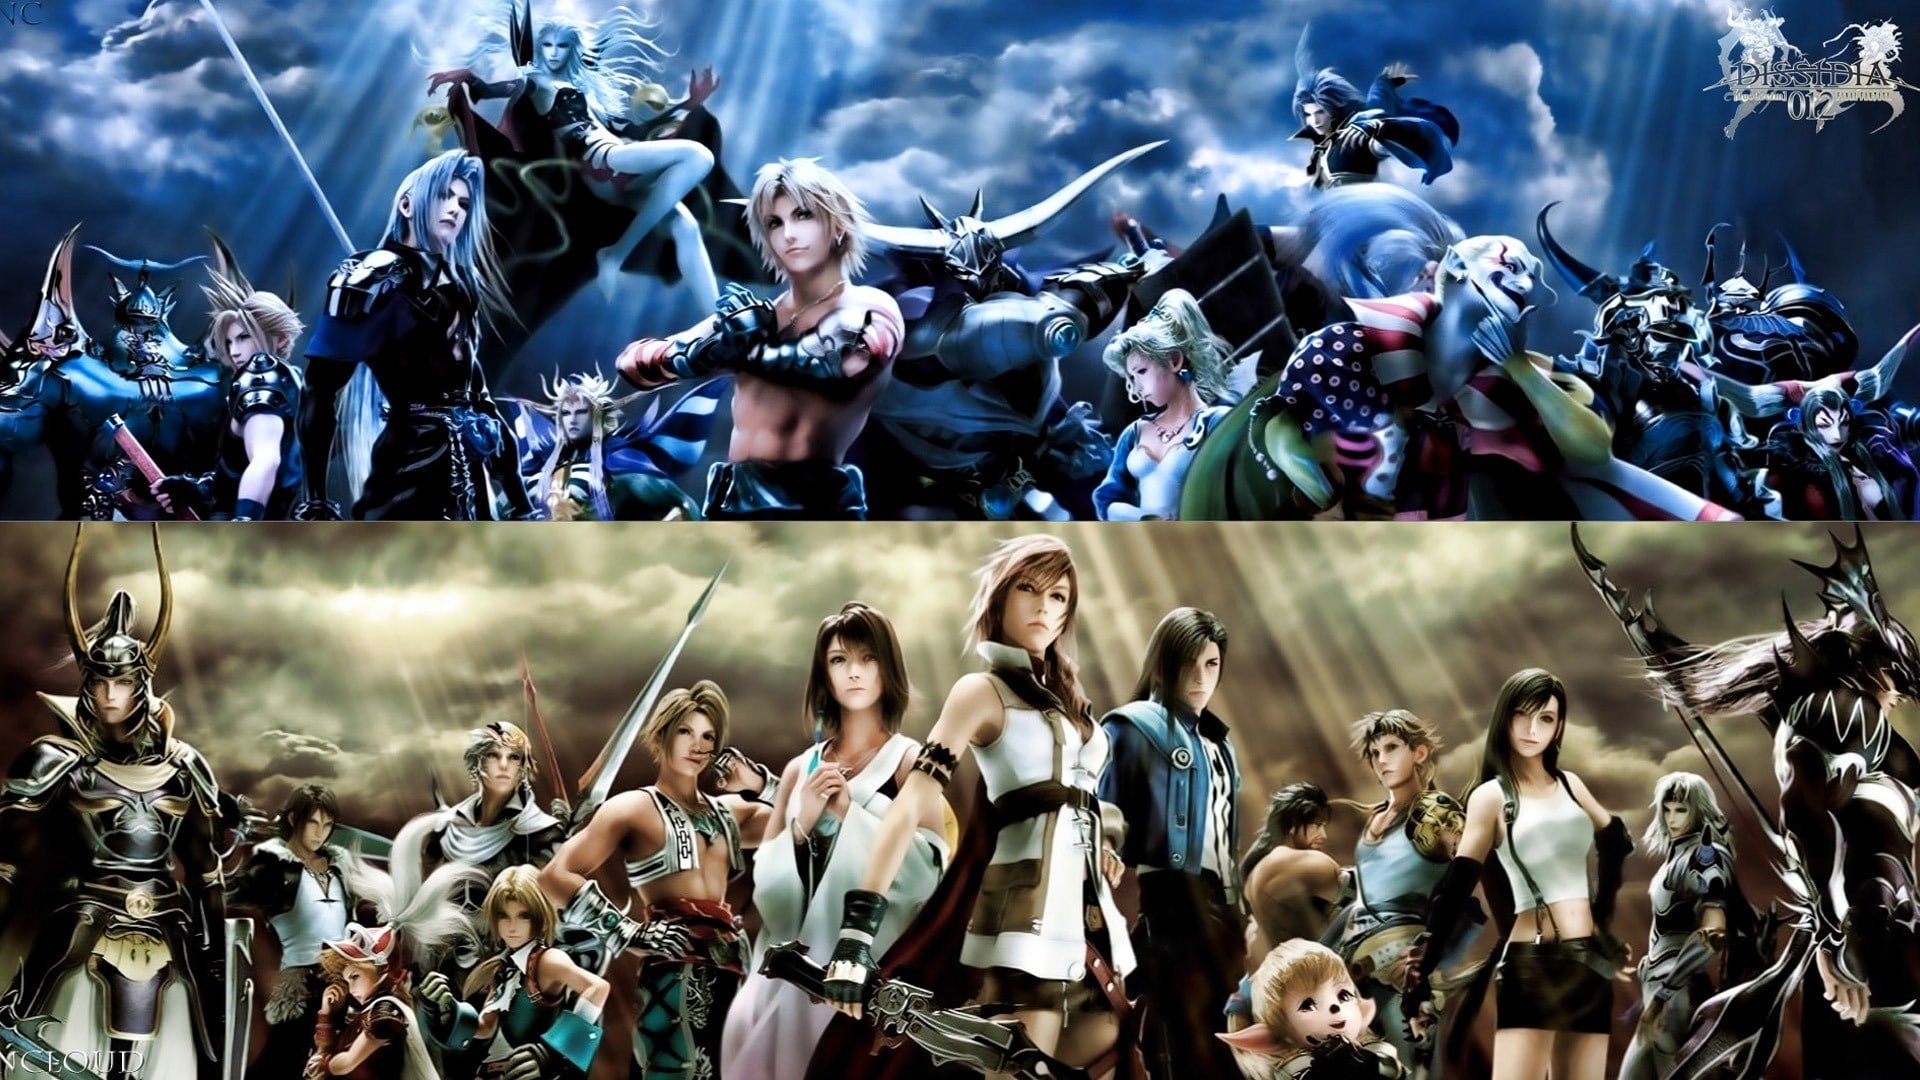 More information about "The Evolution of Final Fantasy"